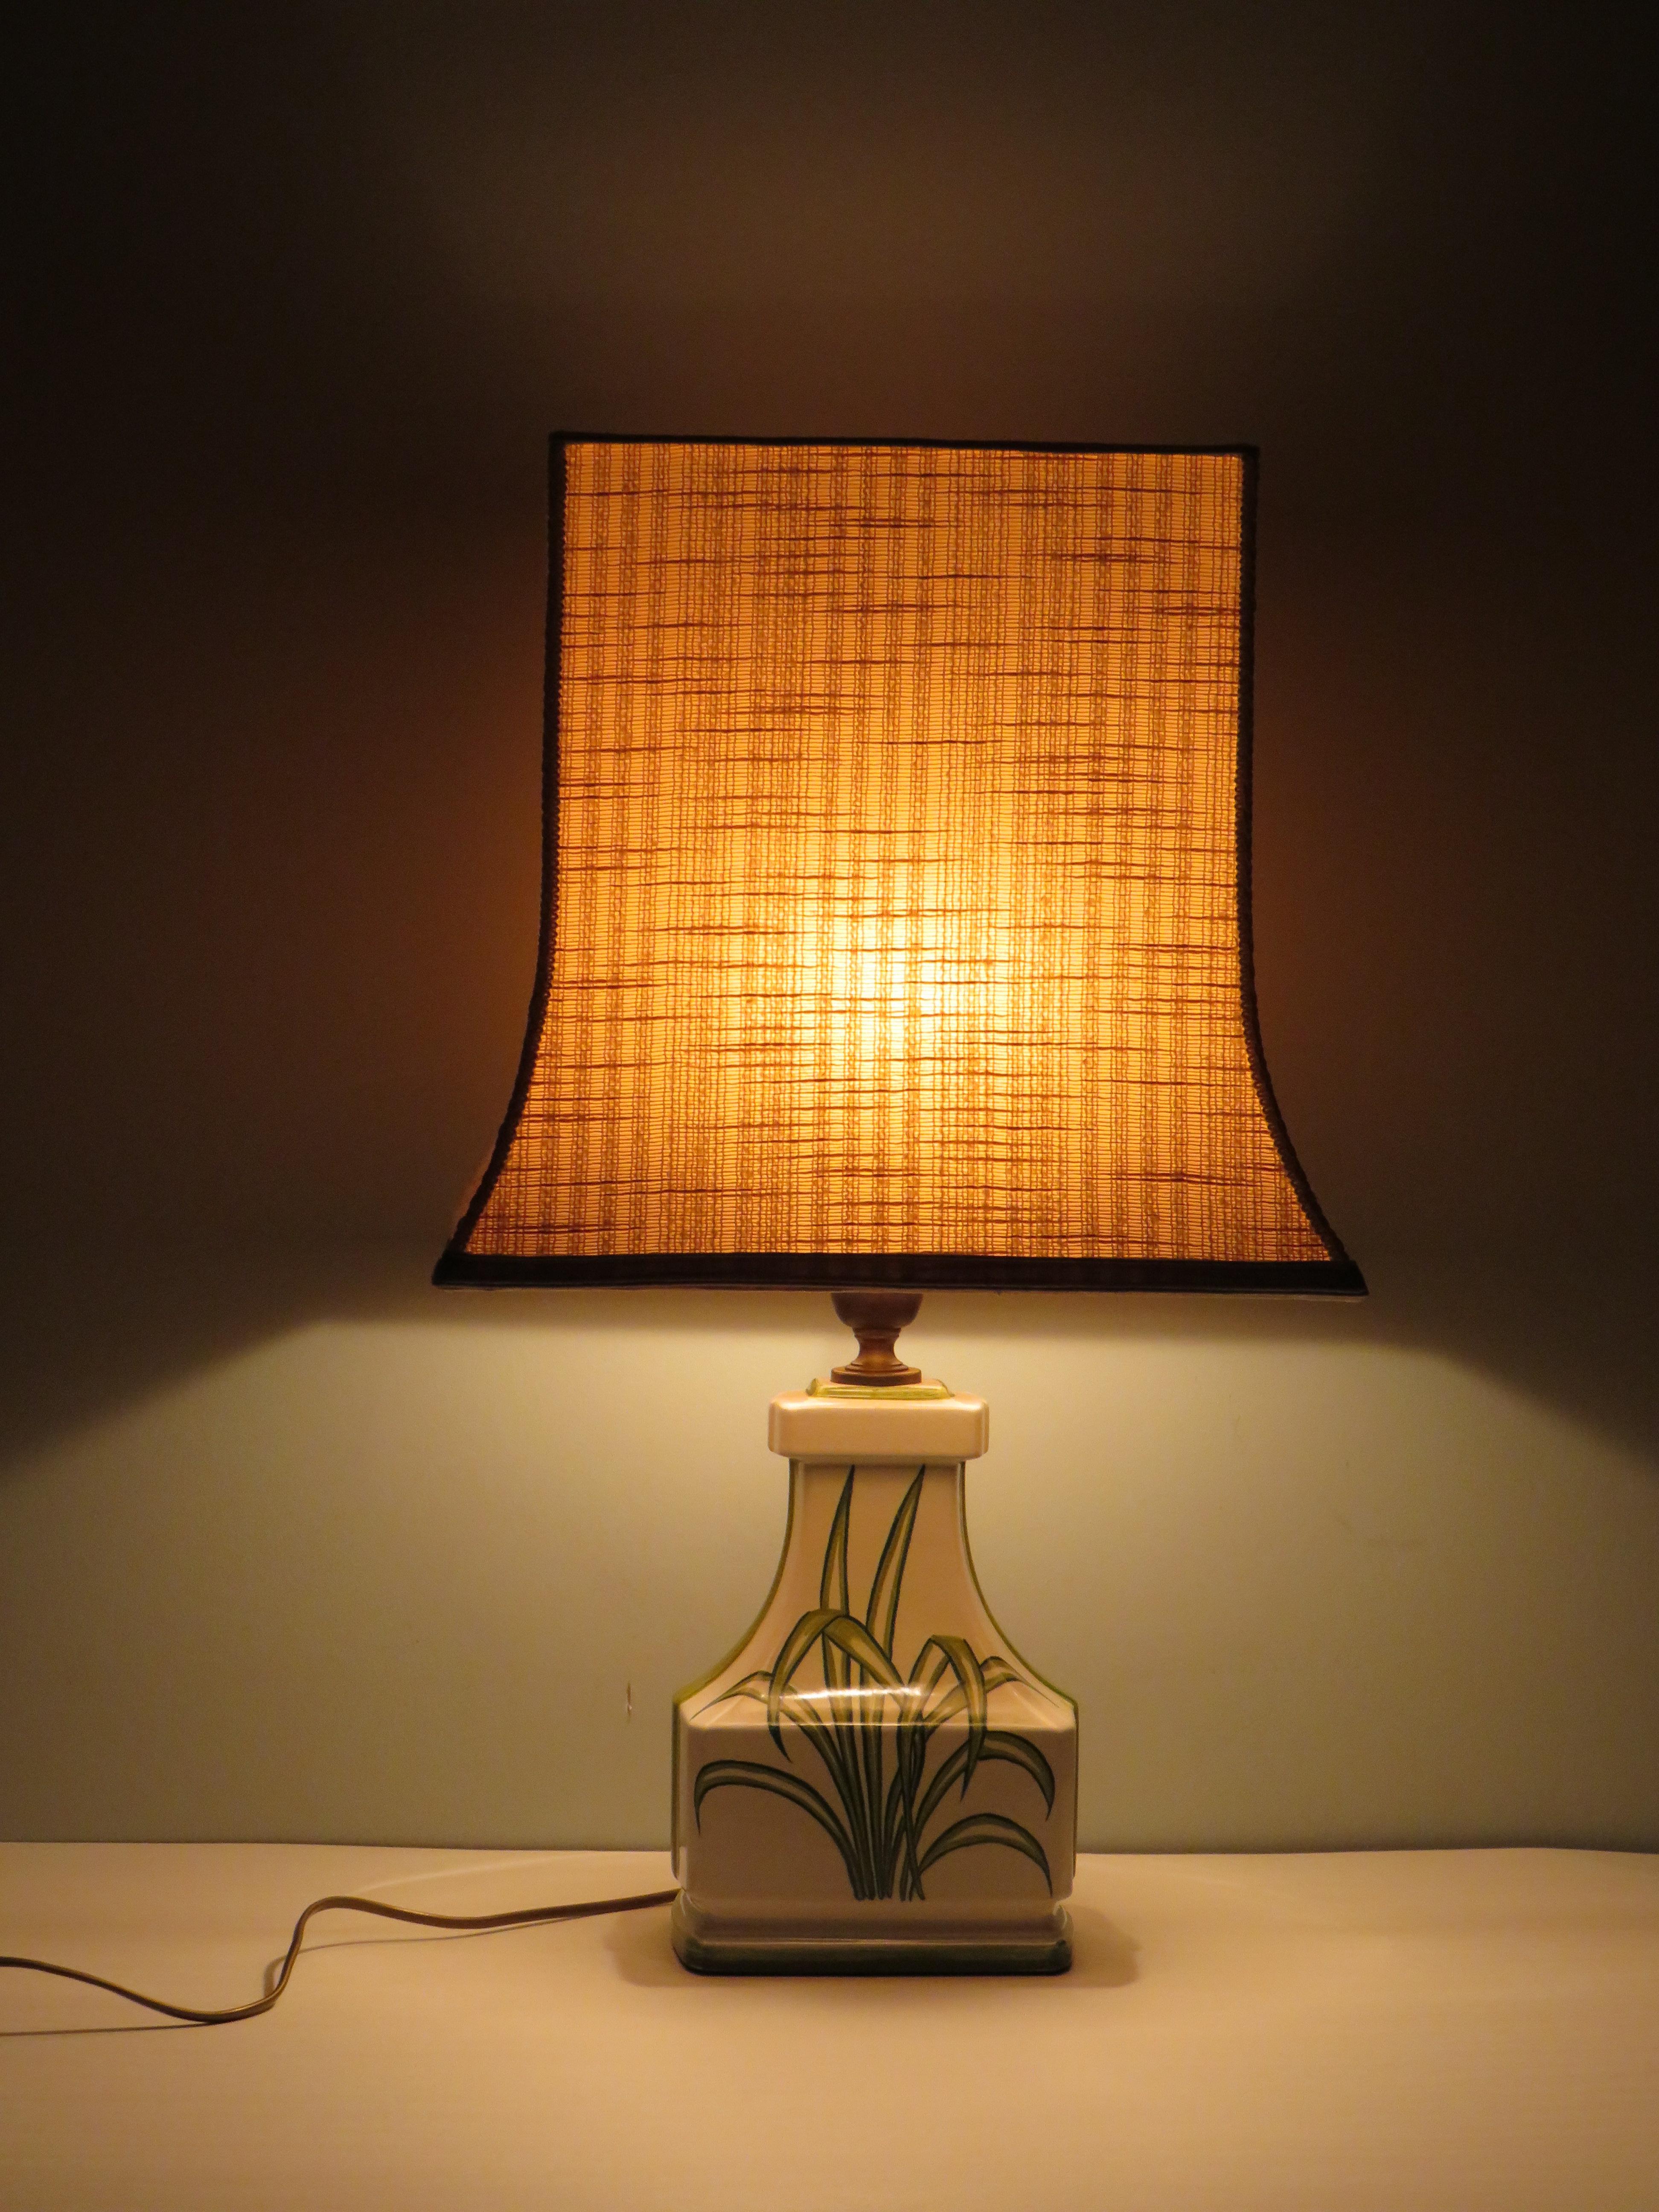 French Mid-Century Ceramic Table Lamp with Pagoda Shaped Lampshade, France, 1960s For Sale